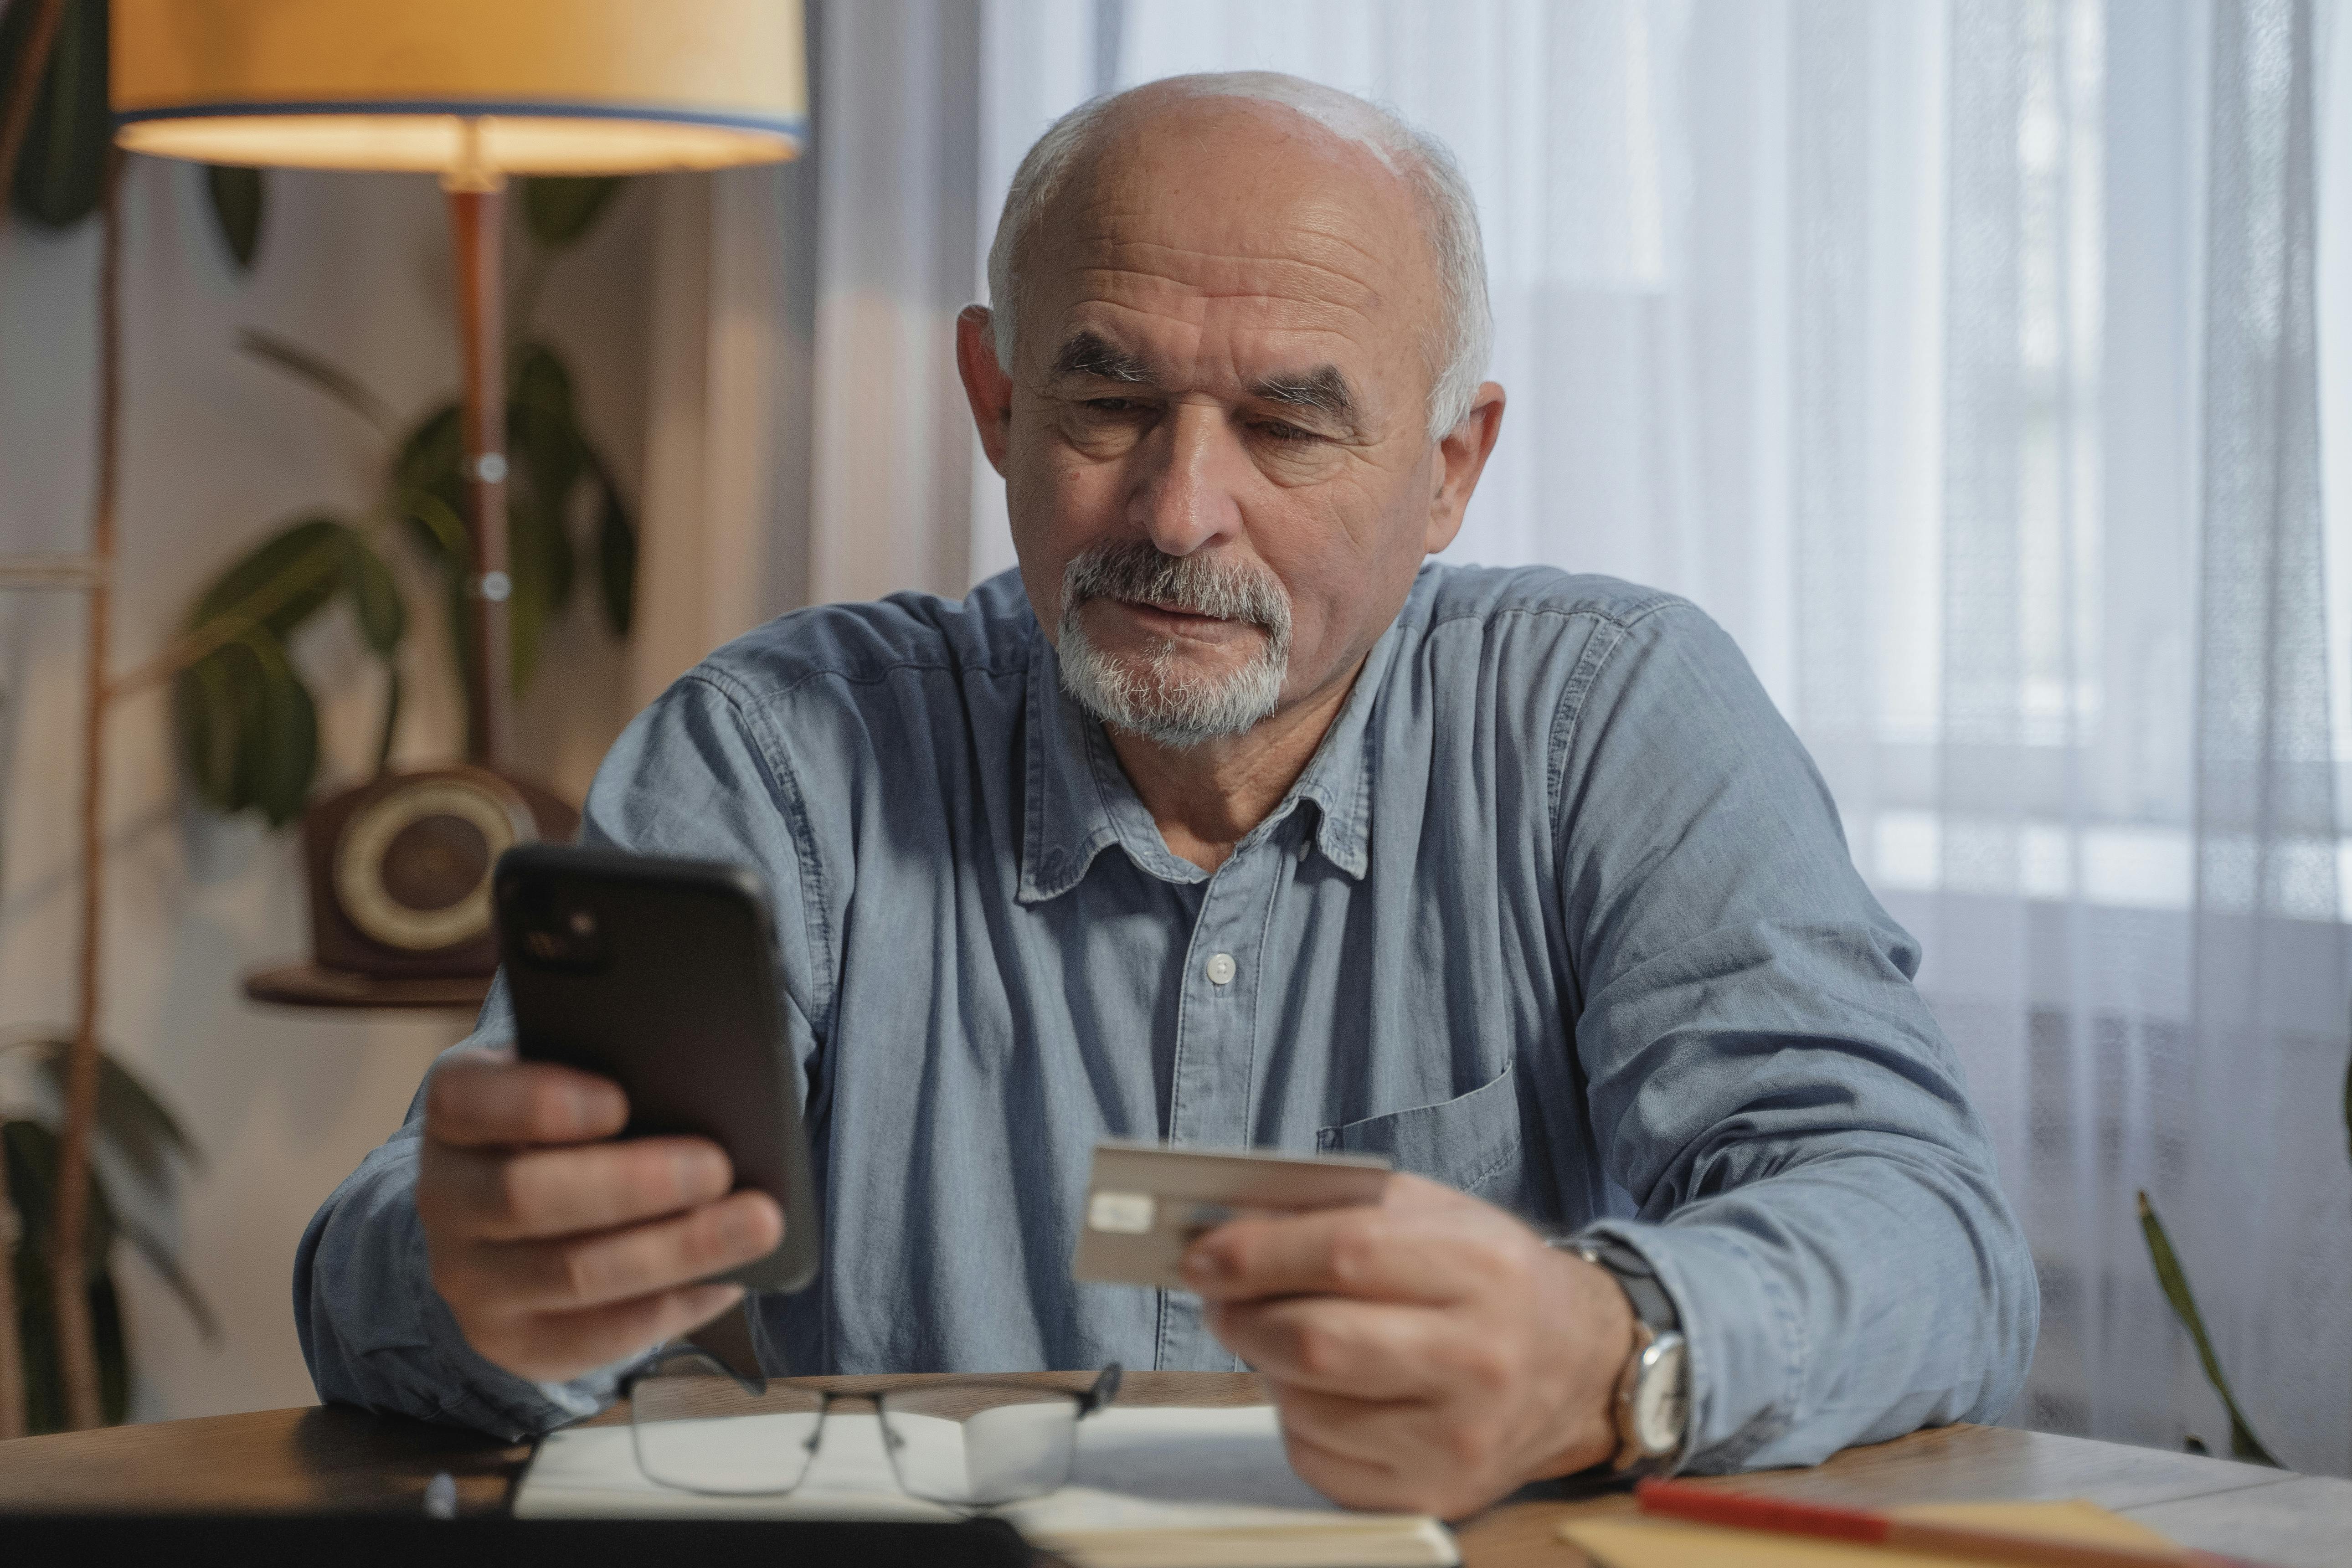 An older man holding his phone in one hand and a bank card in the other | Source: Pexels